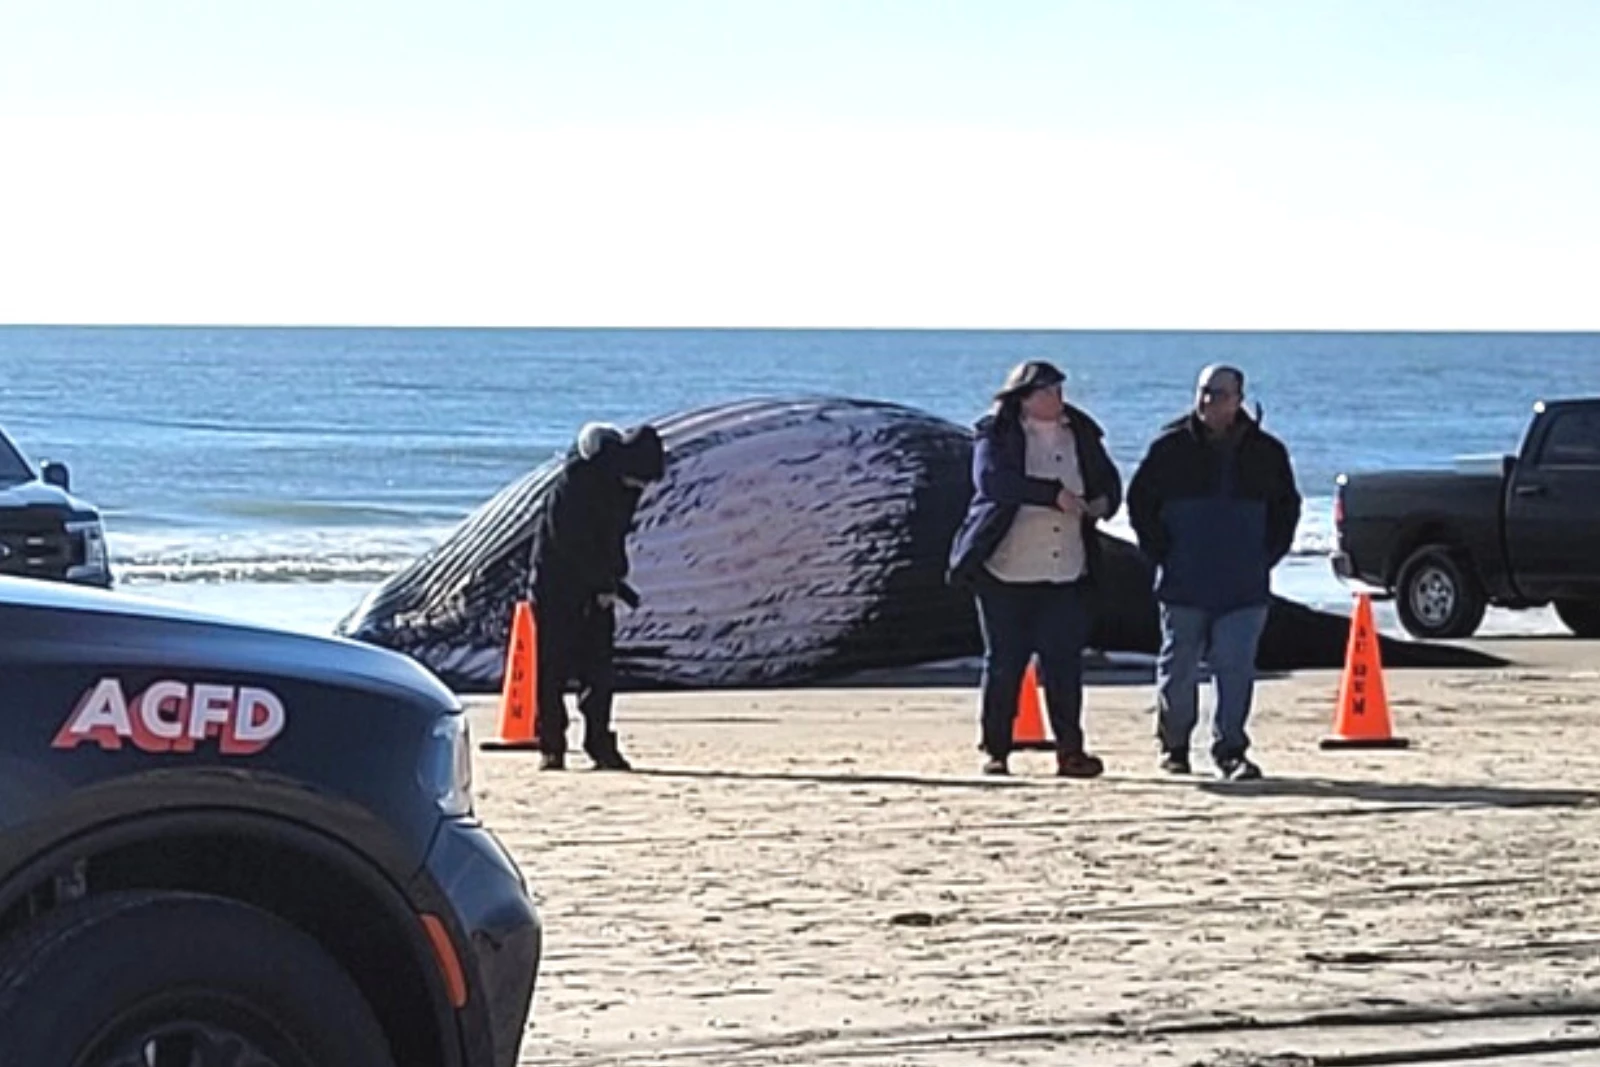 The many mysteries that have washed up on NJ beaches pic